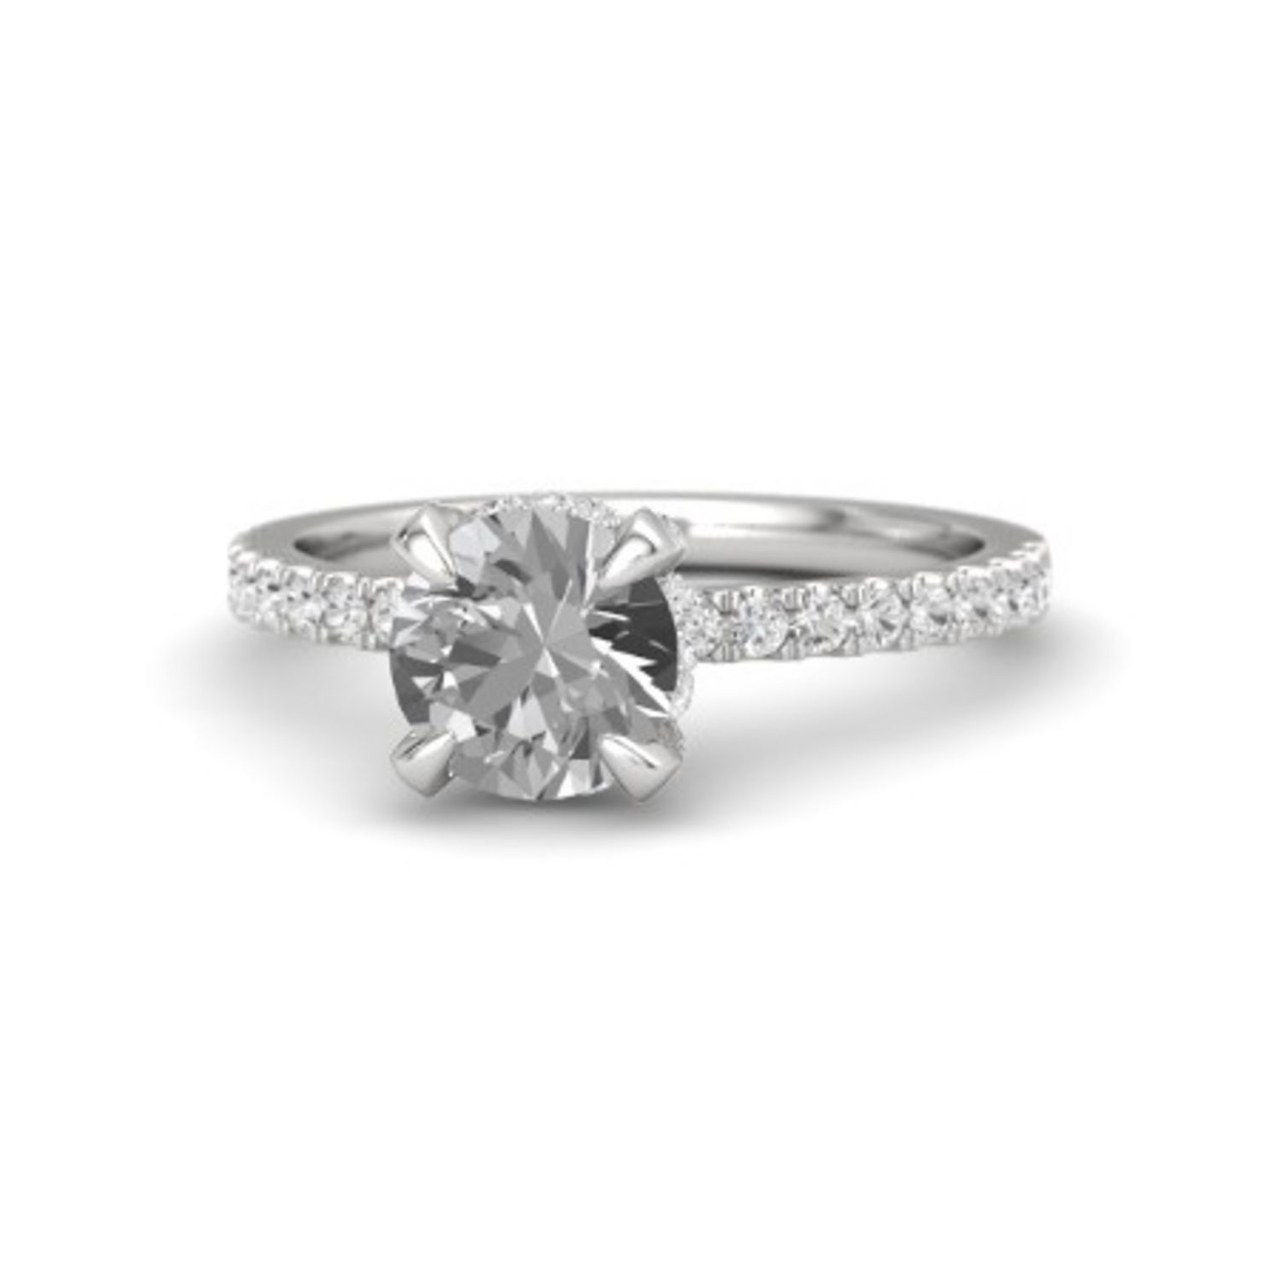 10 affordable engagement rings under 1000 1116 courtesy